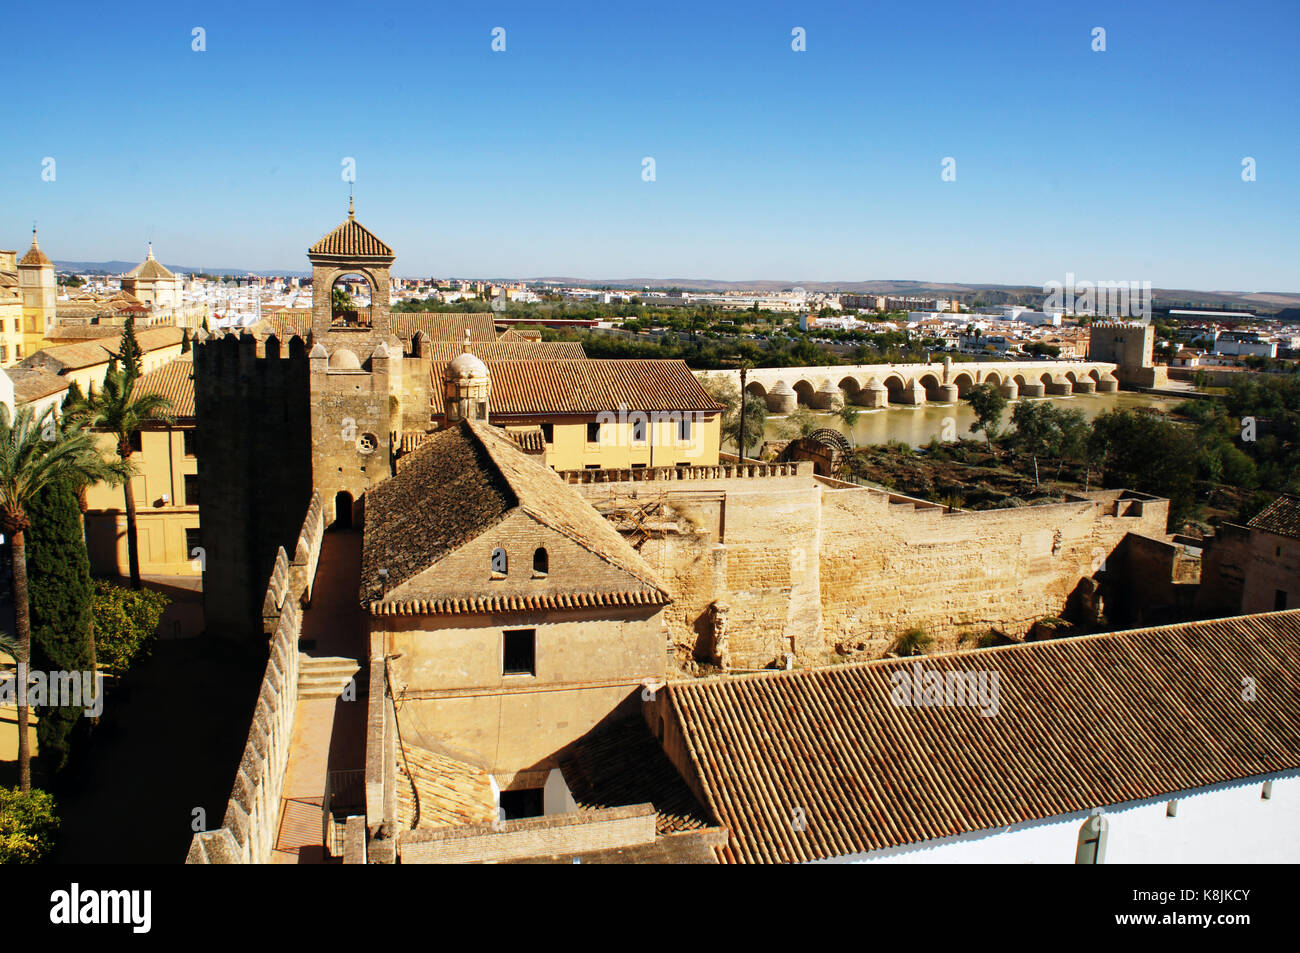 The Roofs and patio of Alcazar of the Christian Monarchs in Cordoba, Spain with bridge on Gwadalkiwir Stock Photo